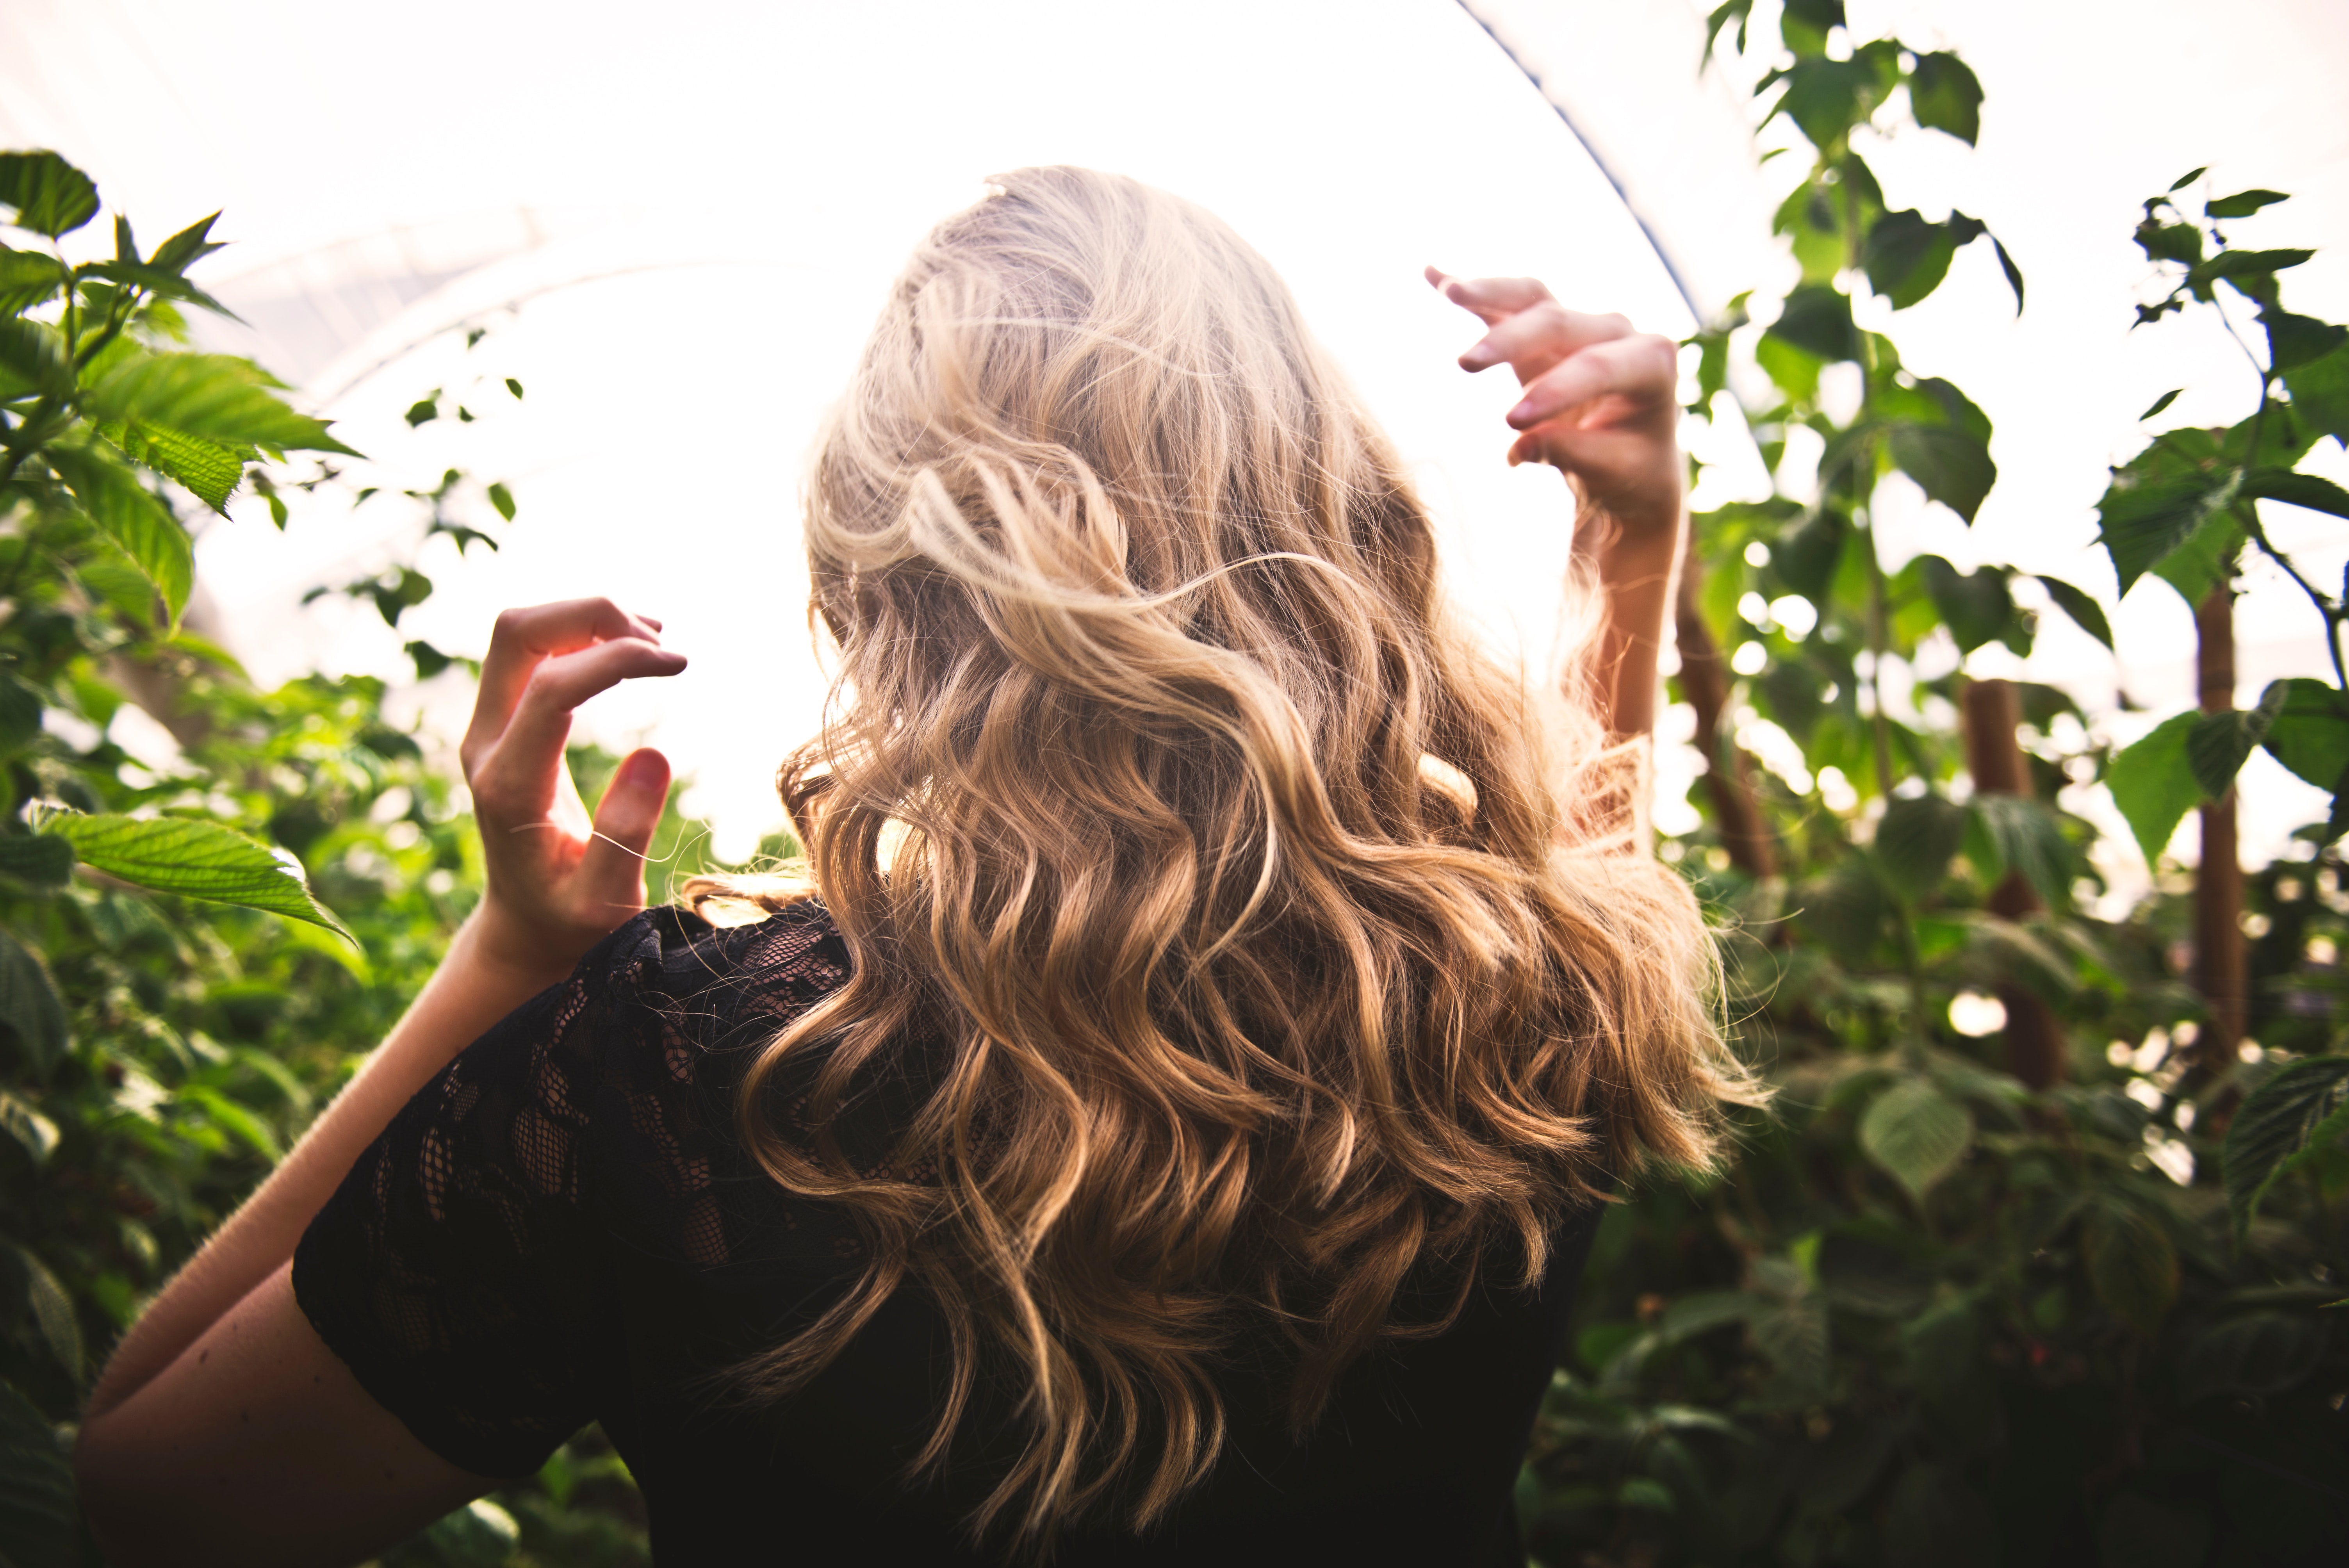 There are a whole series of myths around hair care.